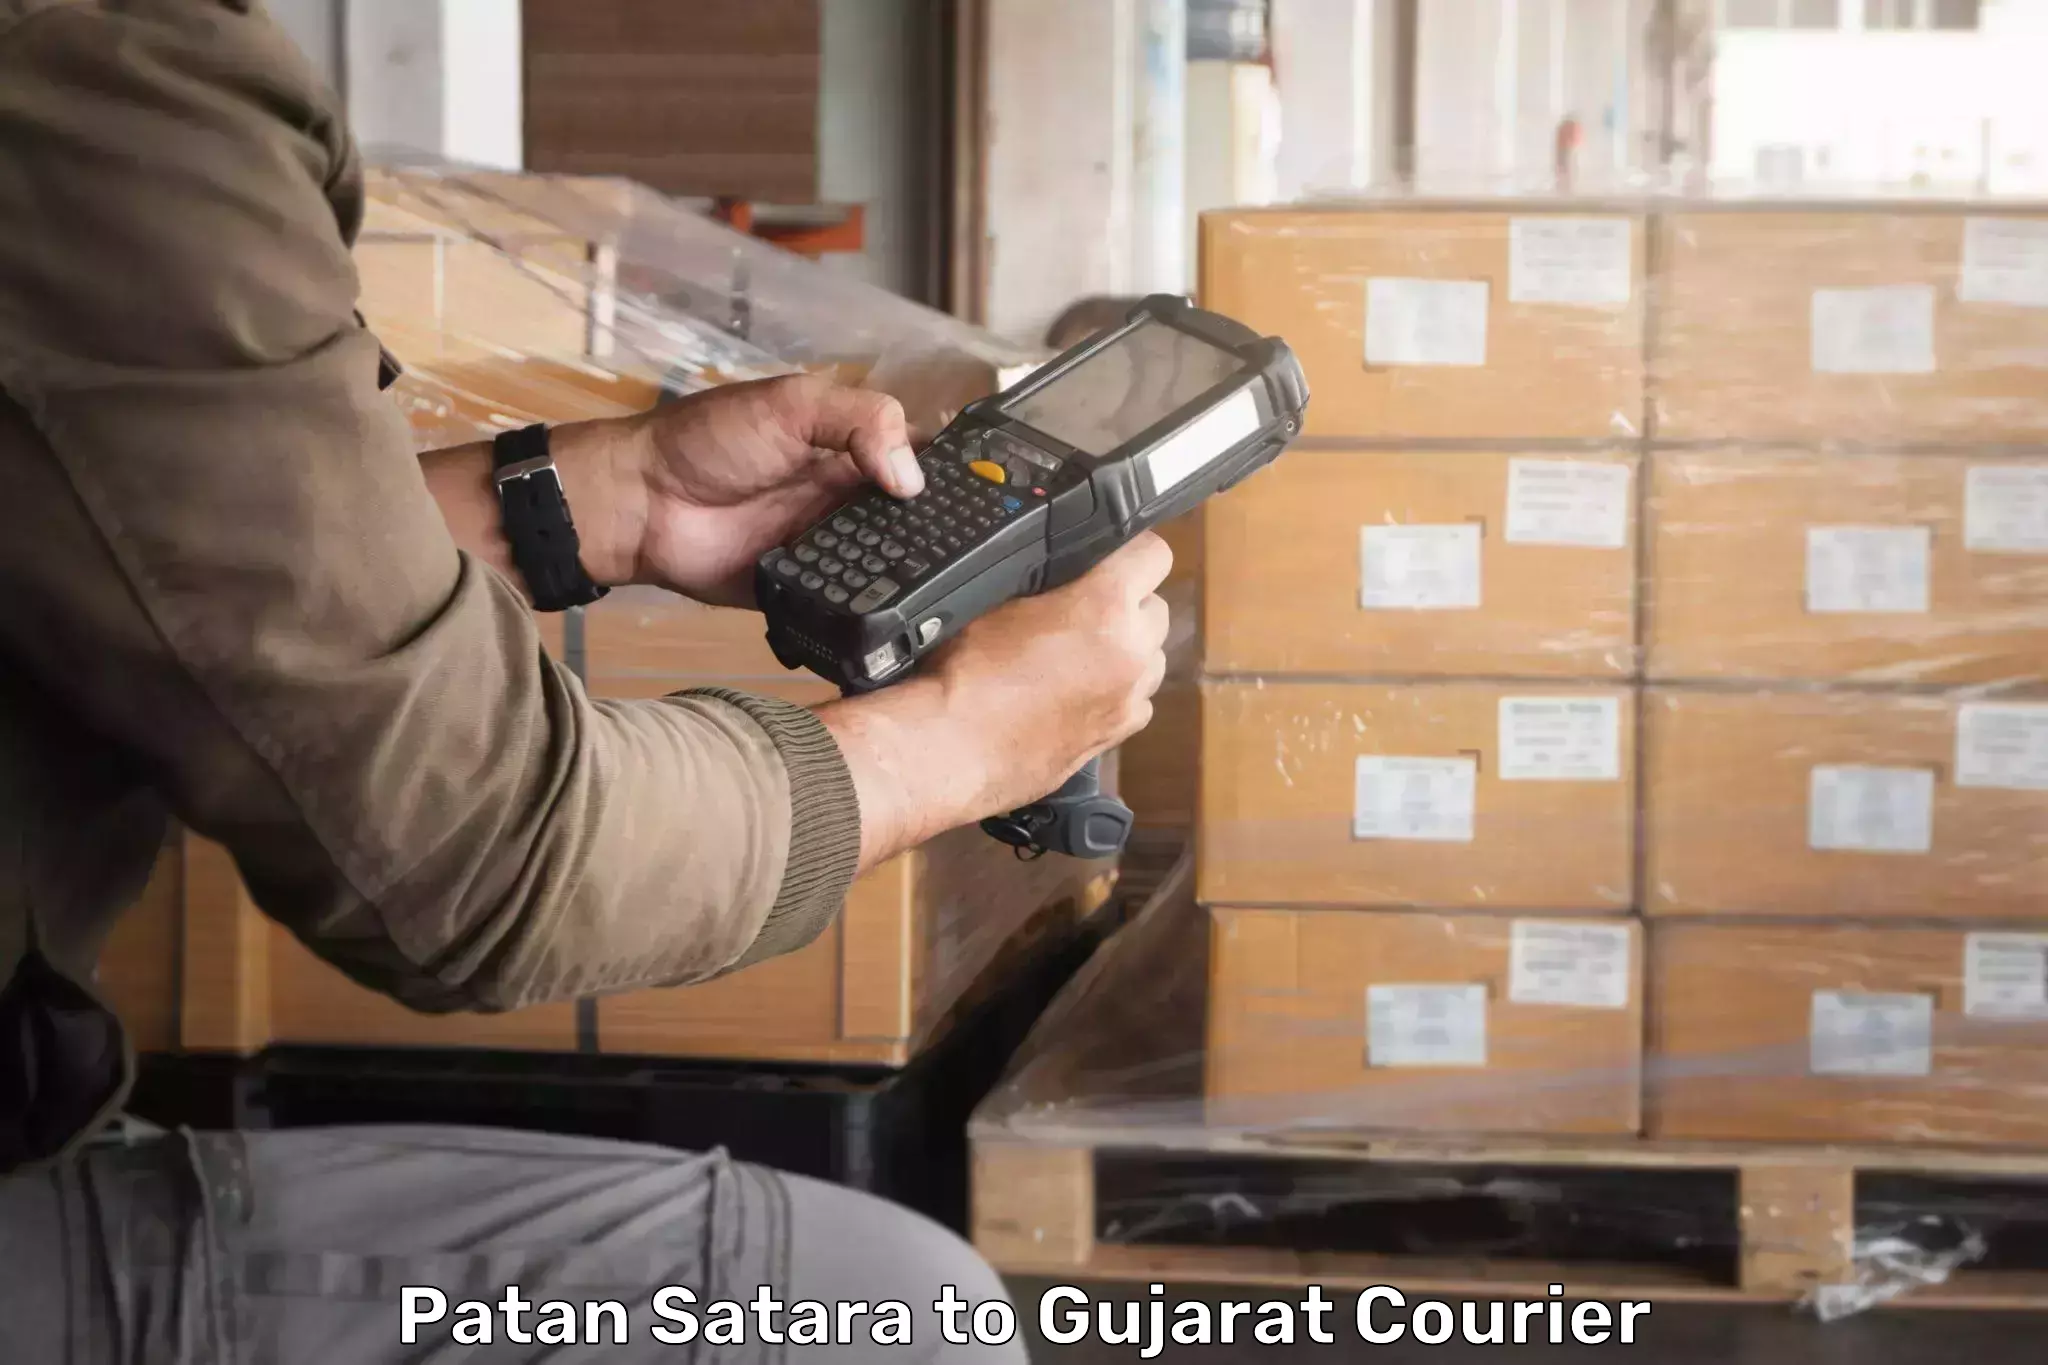 Global courier networks Patan Satara to Anand